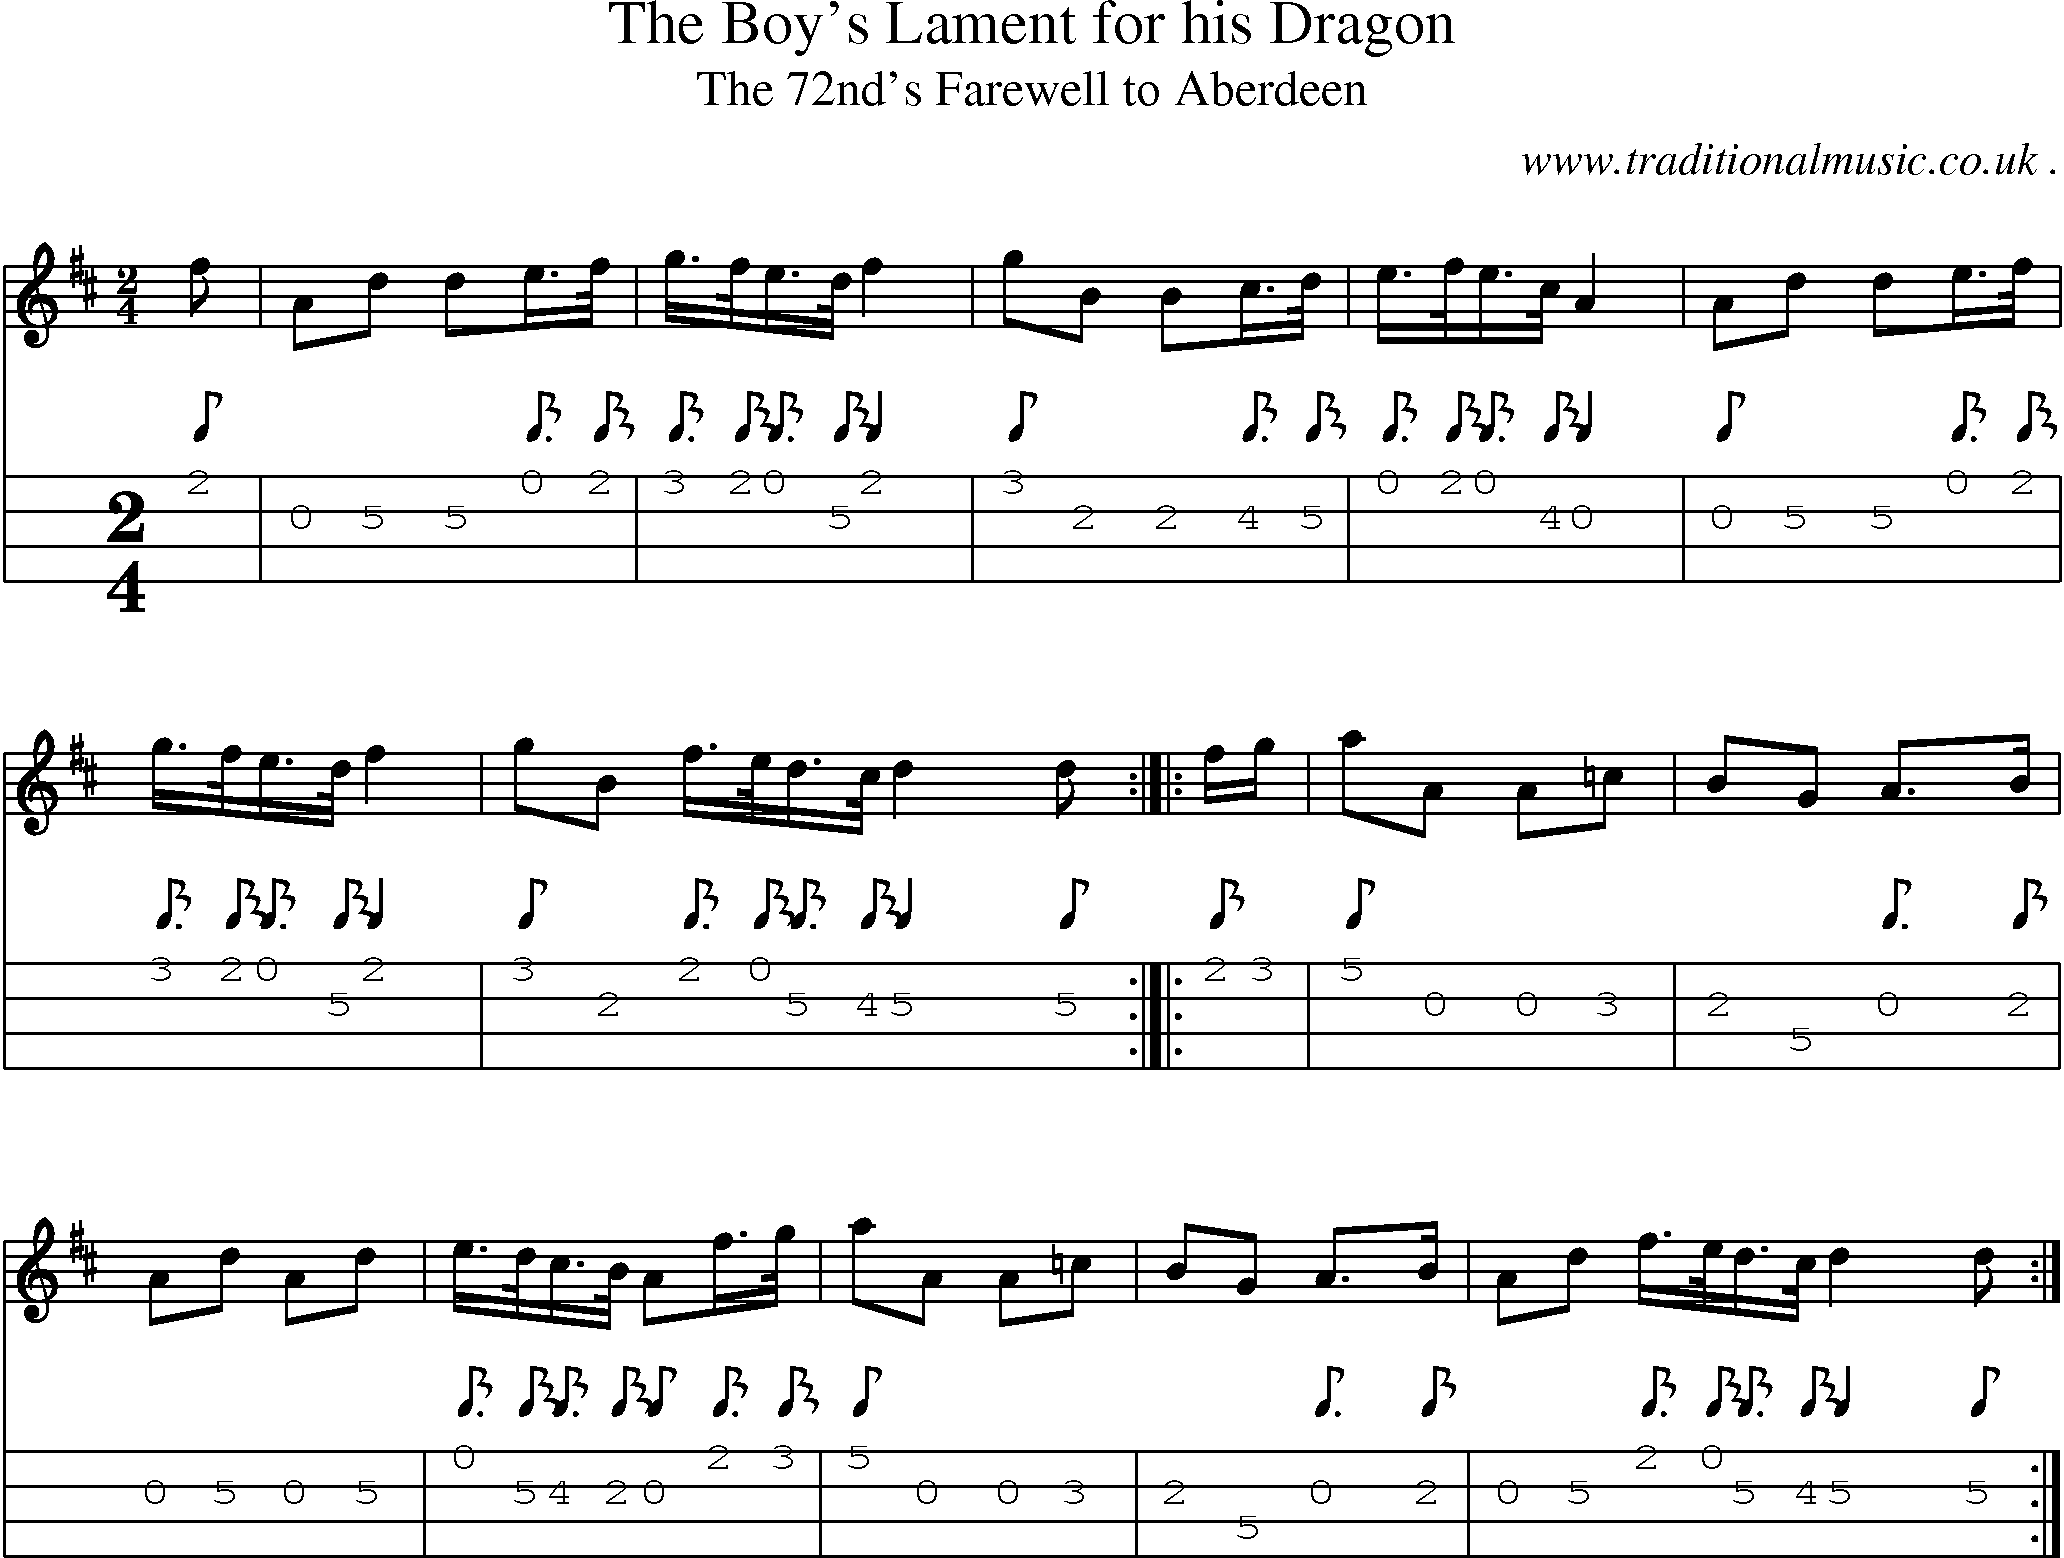 Sheet-music  score, Chords and Mandolin Tabs for The Boys Lament For His Dragon